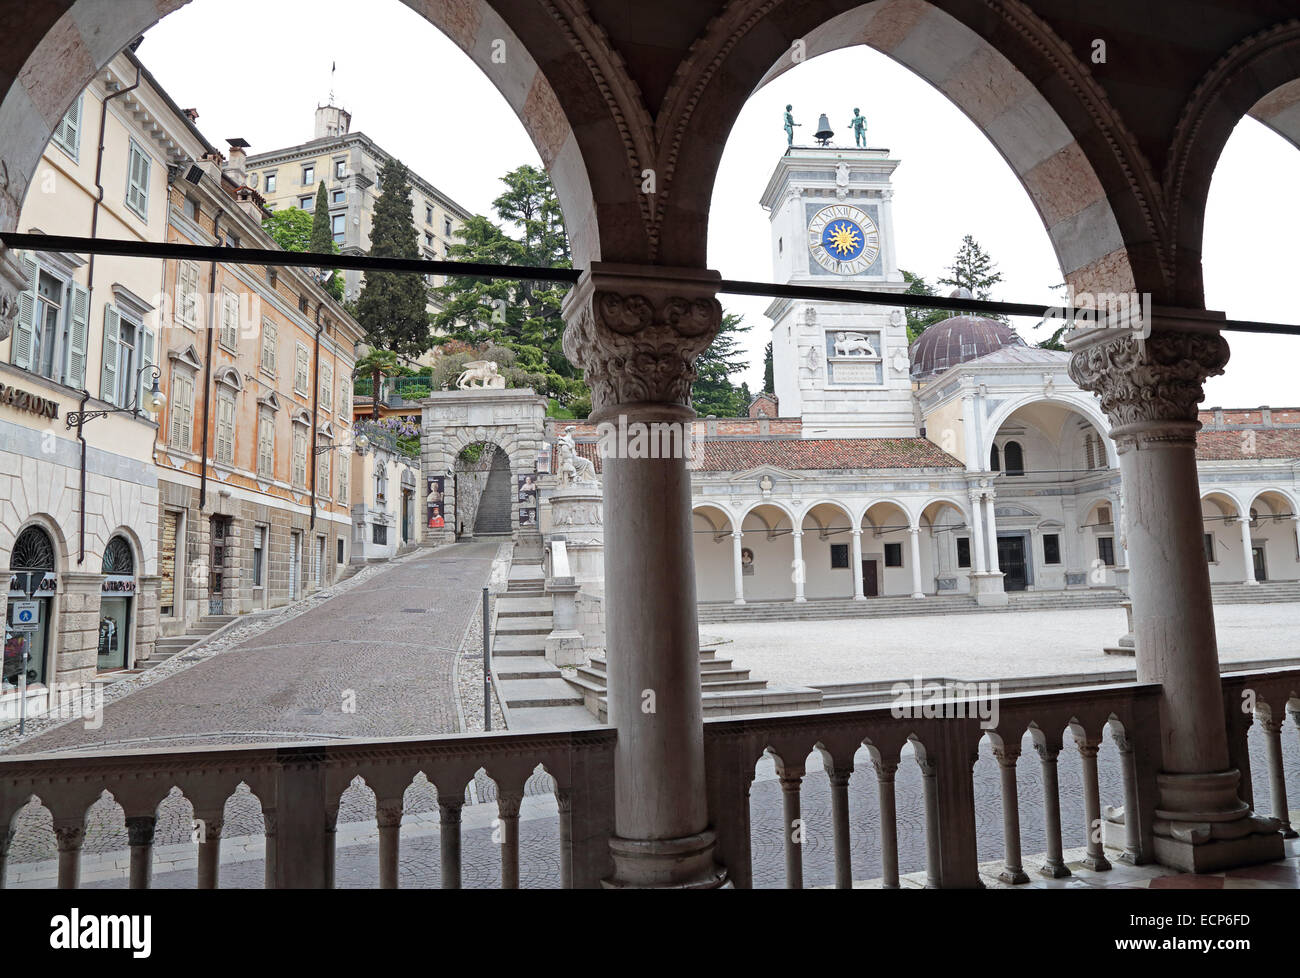 View of Place of Freedom from the loggia, Udine, Italy Stock Photo